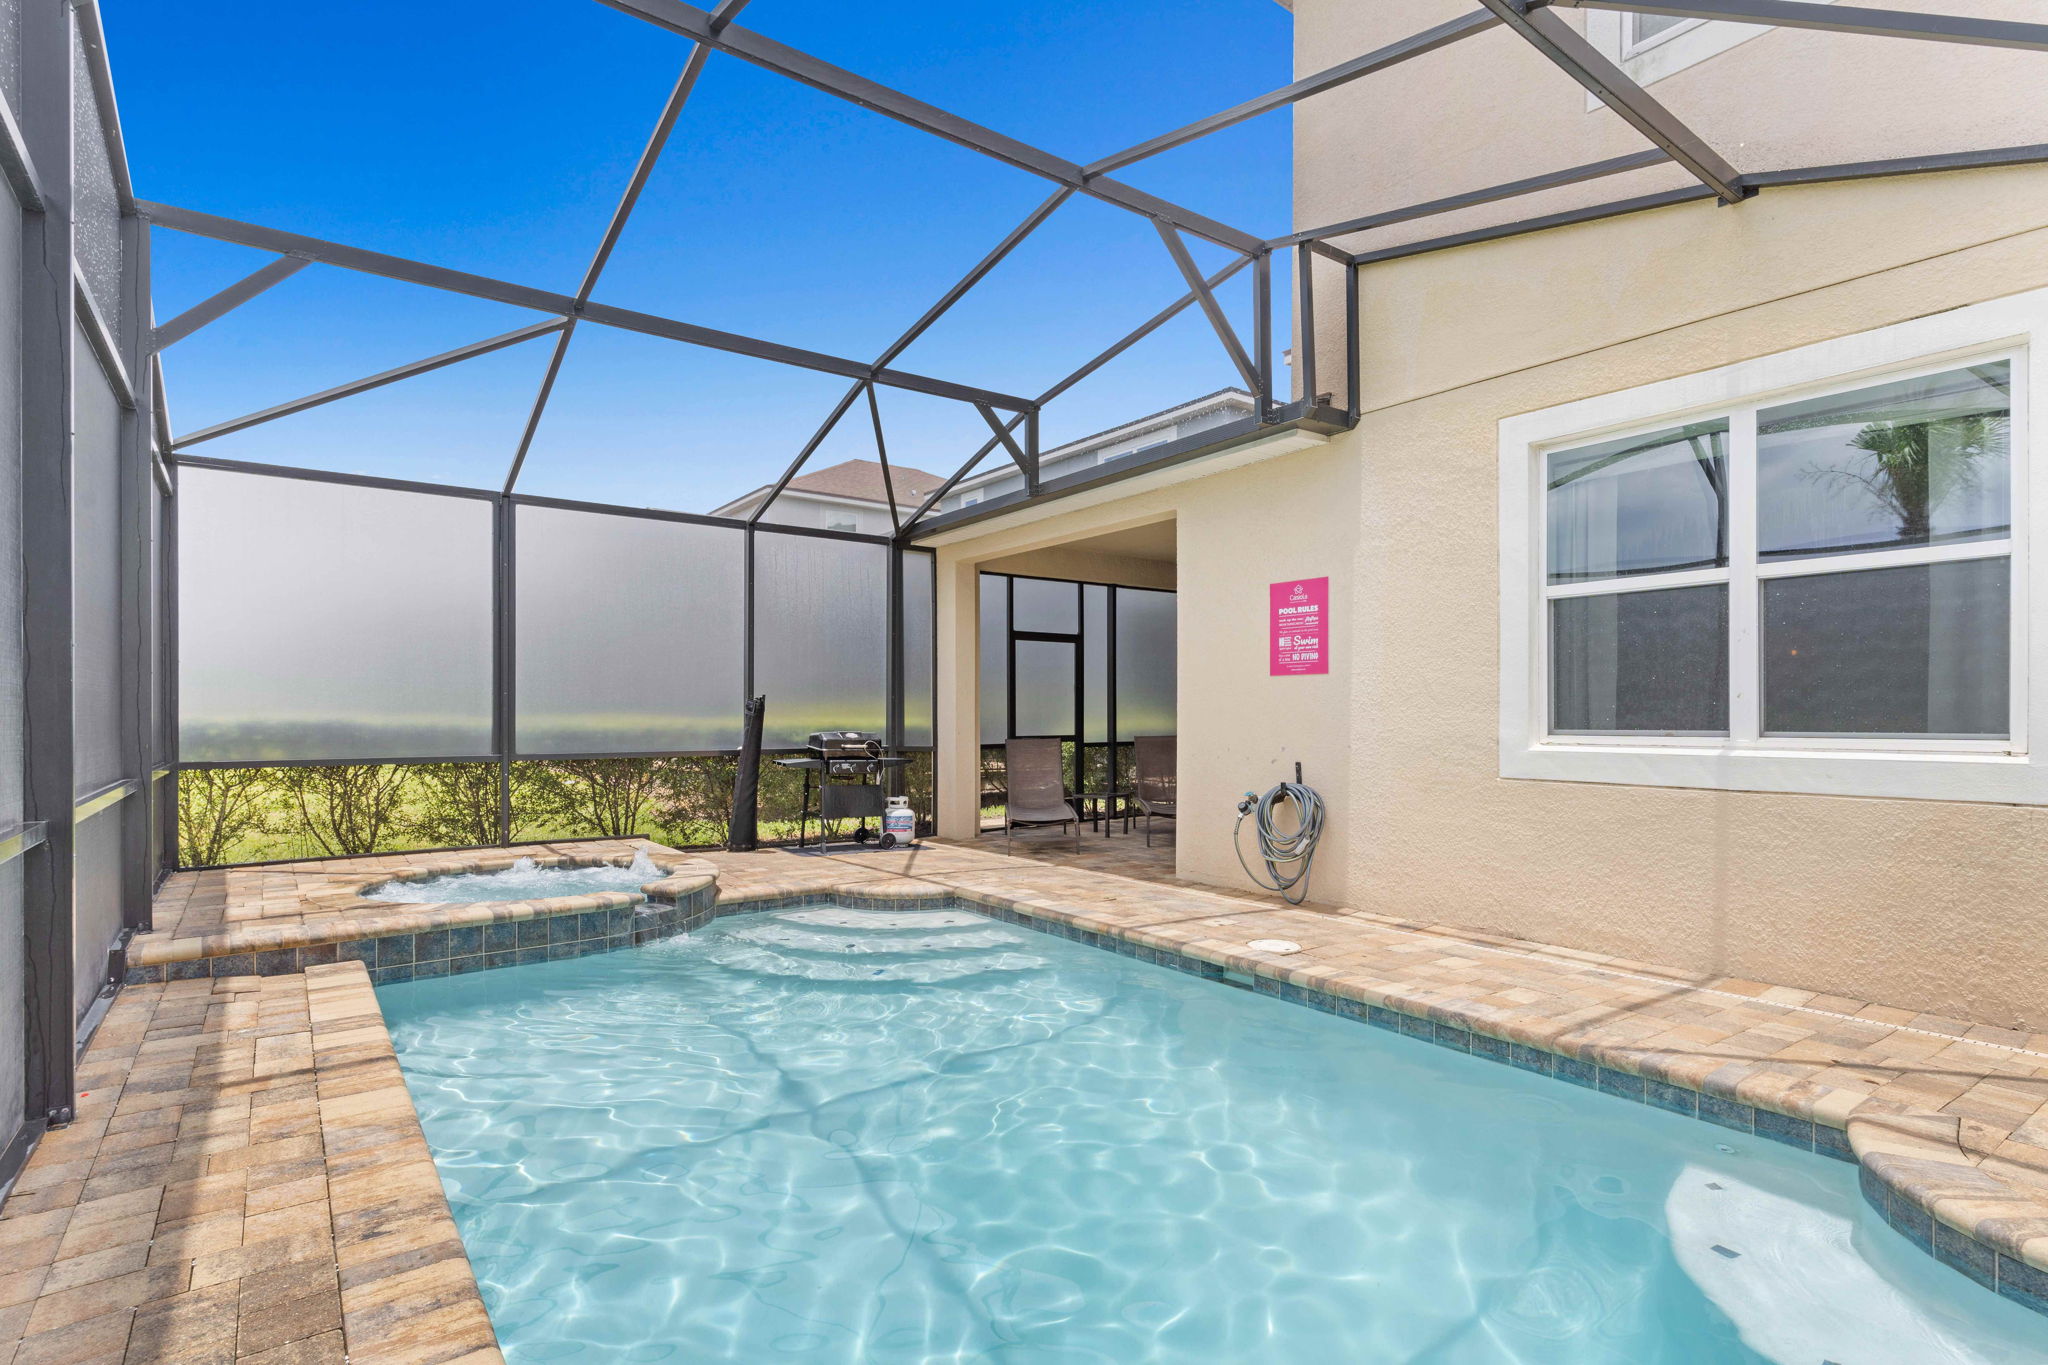 Resplendent private pool area of the home in Kissimmee Florida - Provides a relaxed atmosphere for unwinding  - Space for swimming, games, and activities - Inviting pool area for a perfect getaway